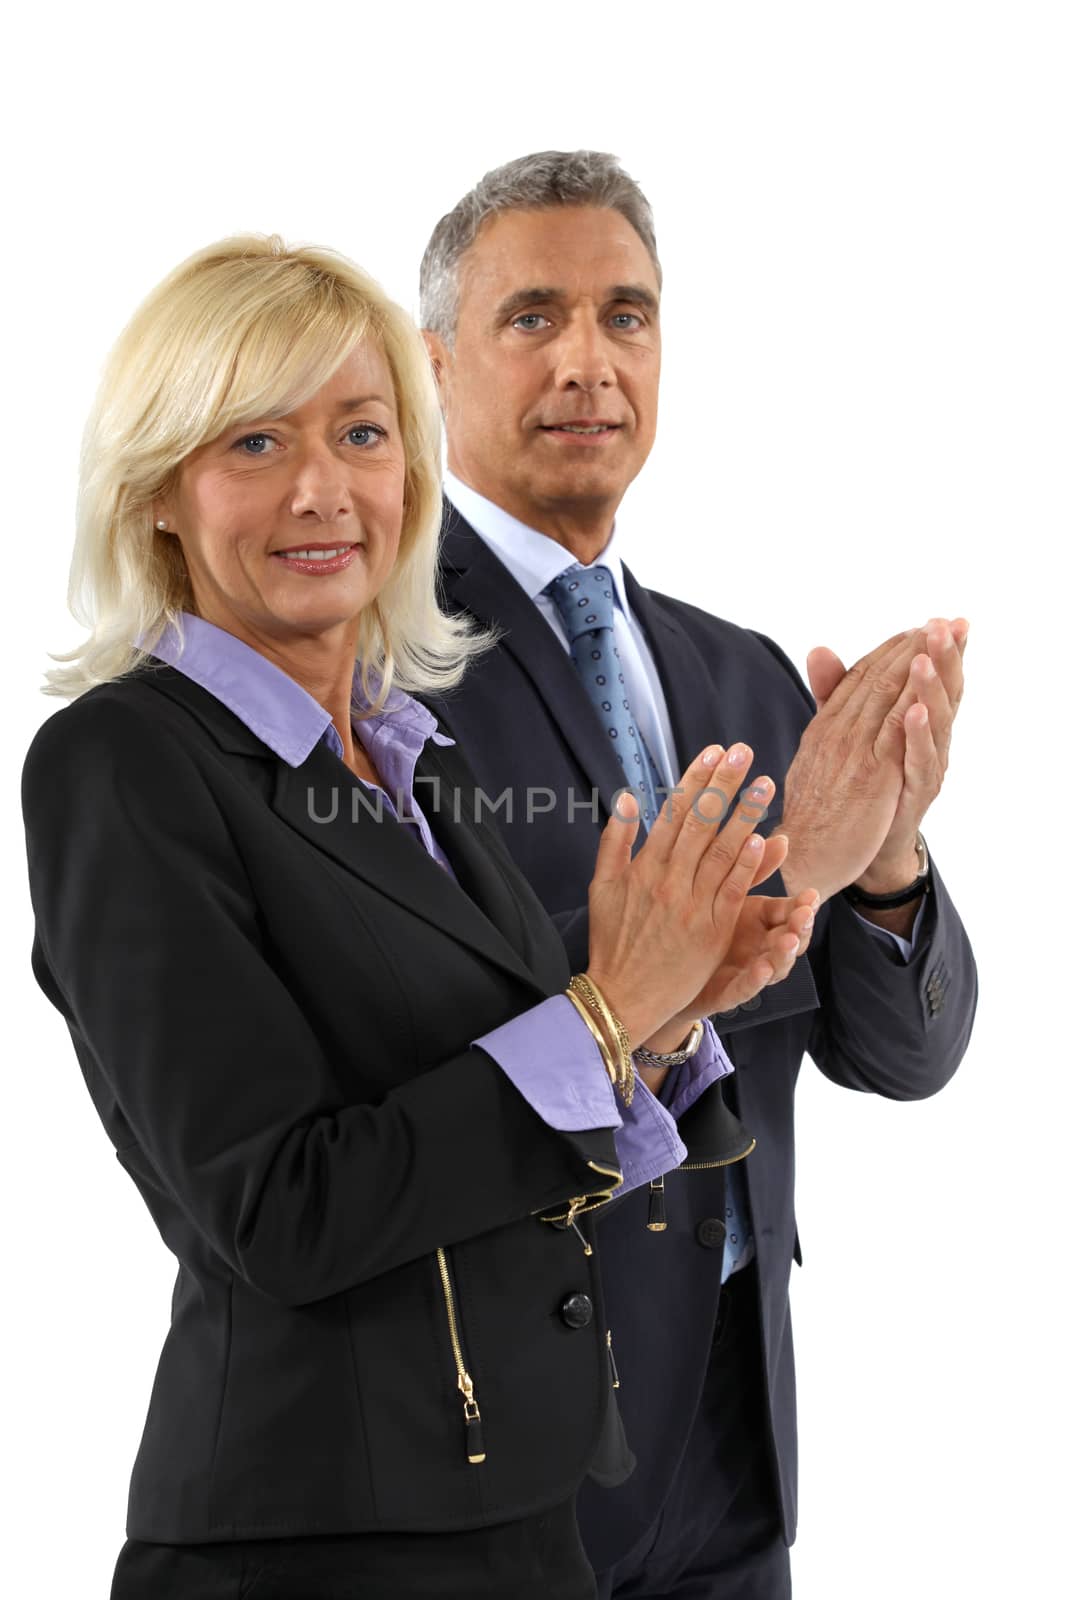 Business professionals clapping their hands by phovoir